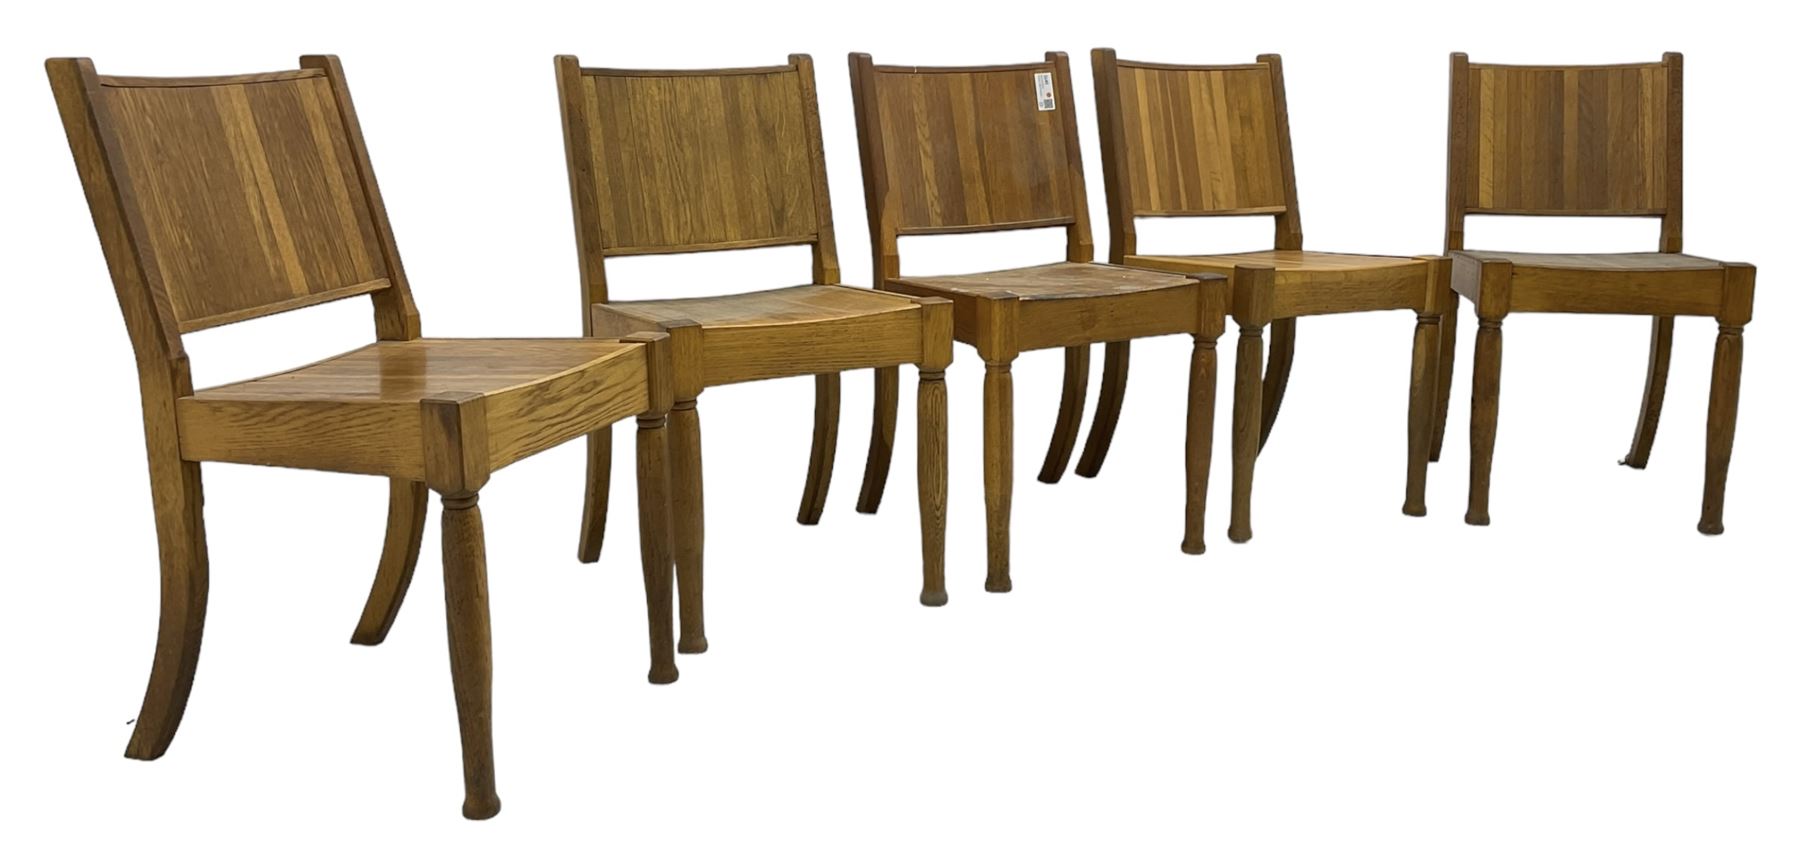 Set of five 20th century oak chairs - Image 5 of 6